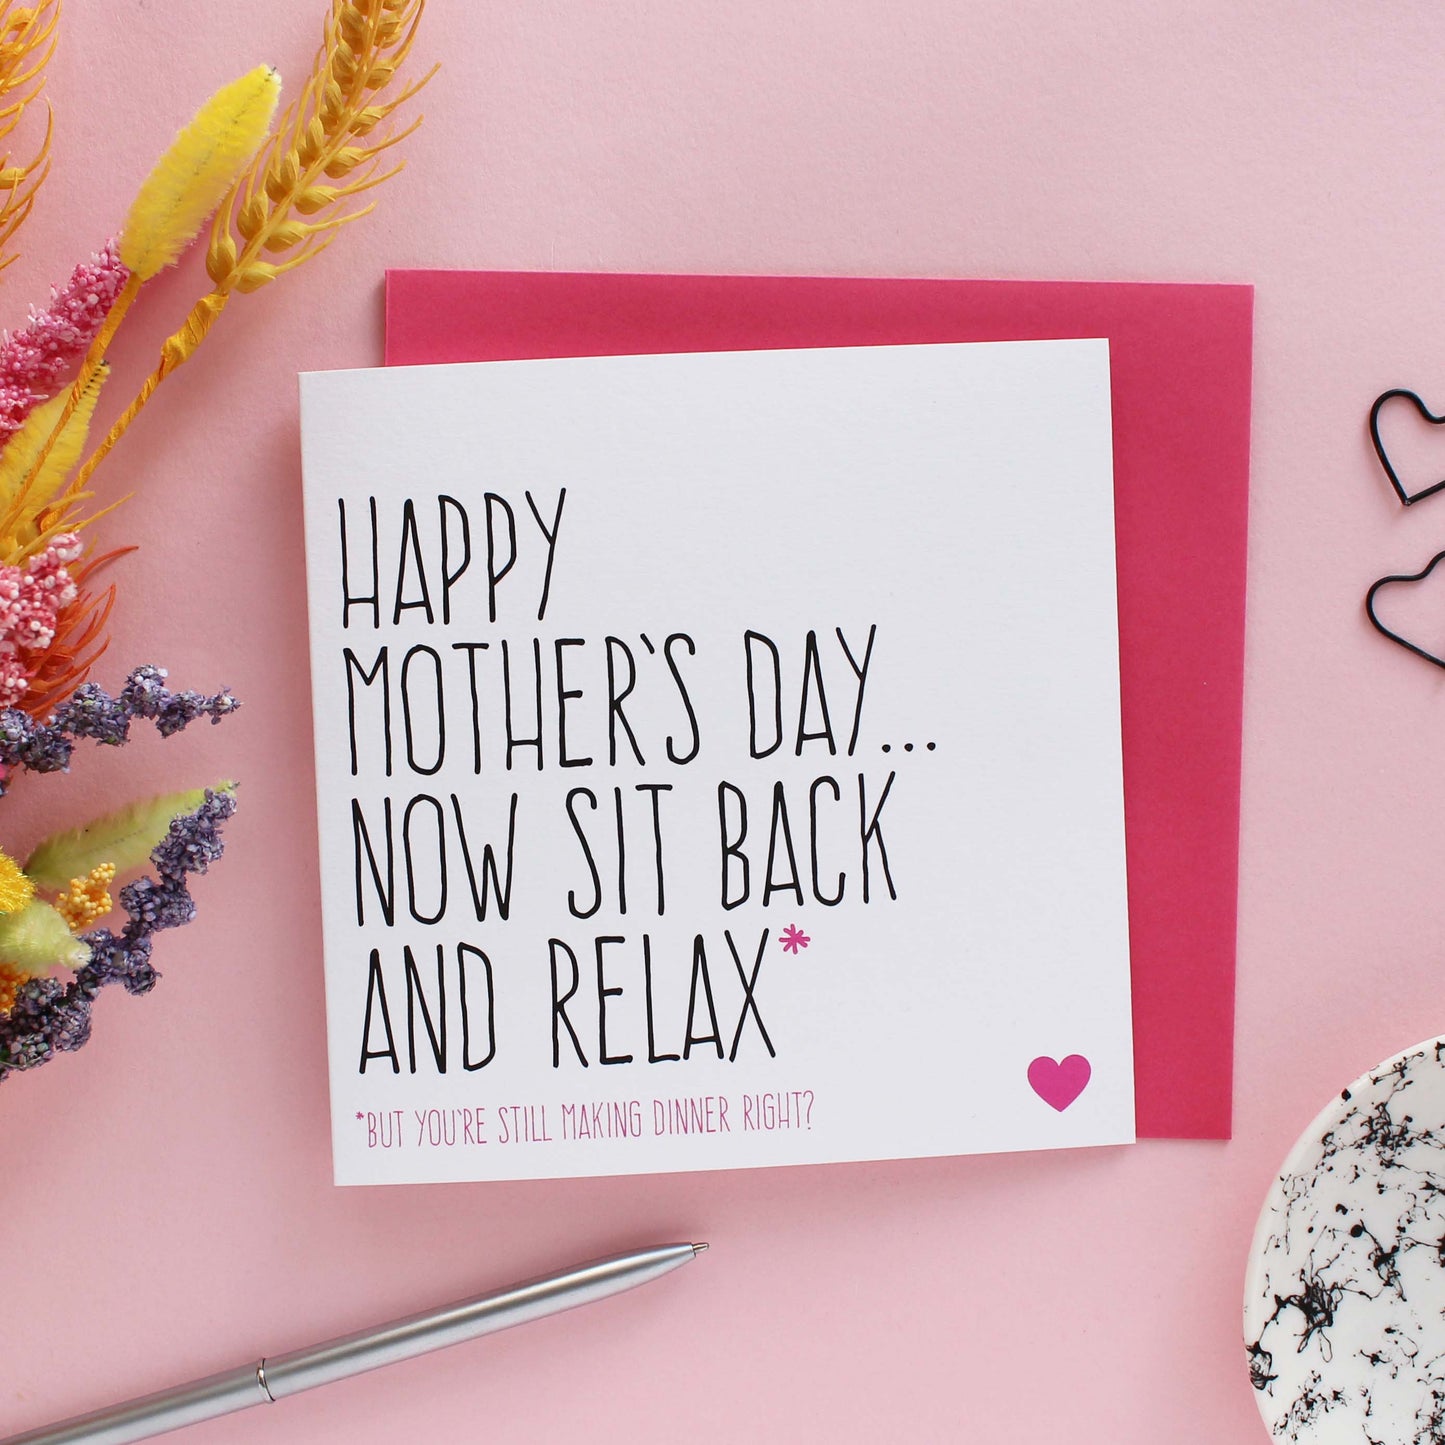 Sit back and relax Mother's Day card from Purple Tree Designs